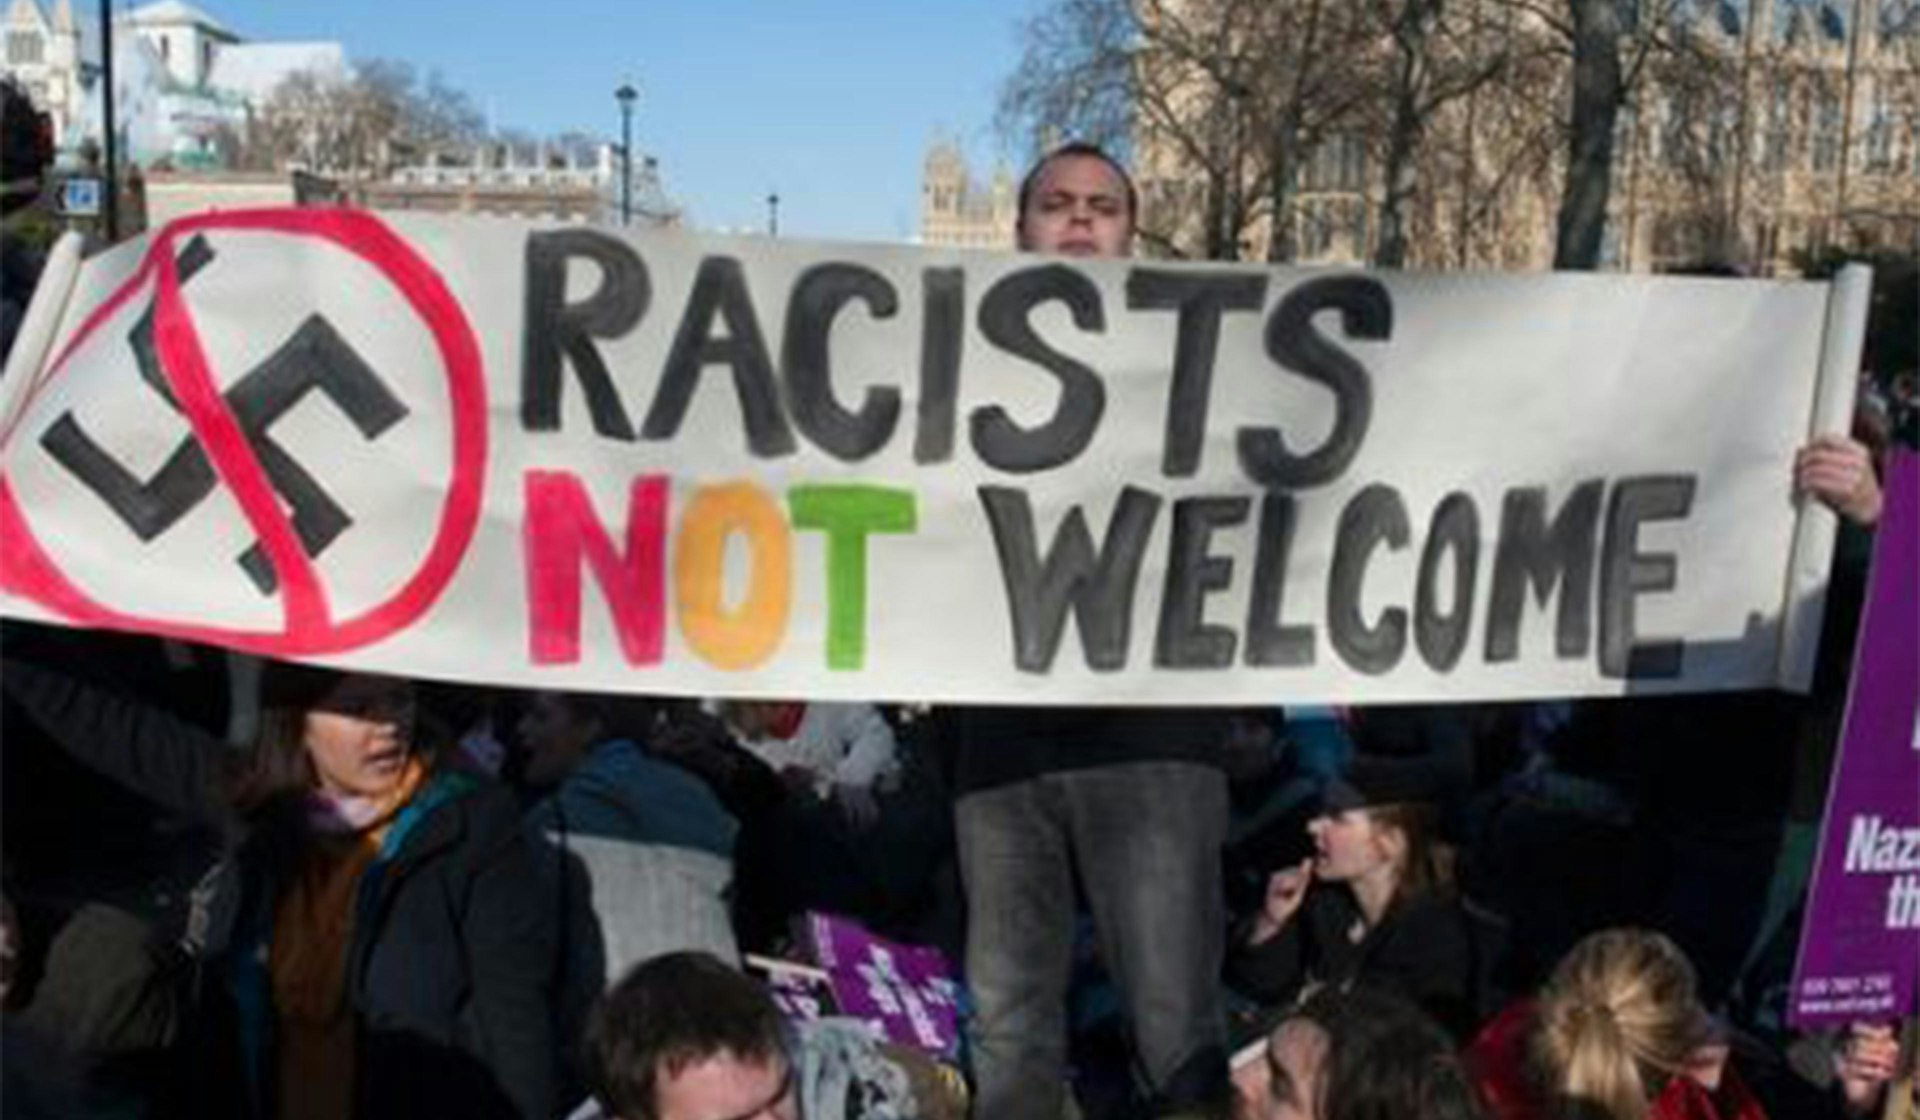 How deep is Britain's racism problem?